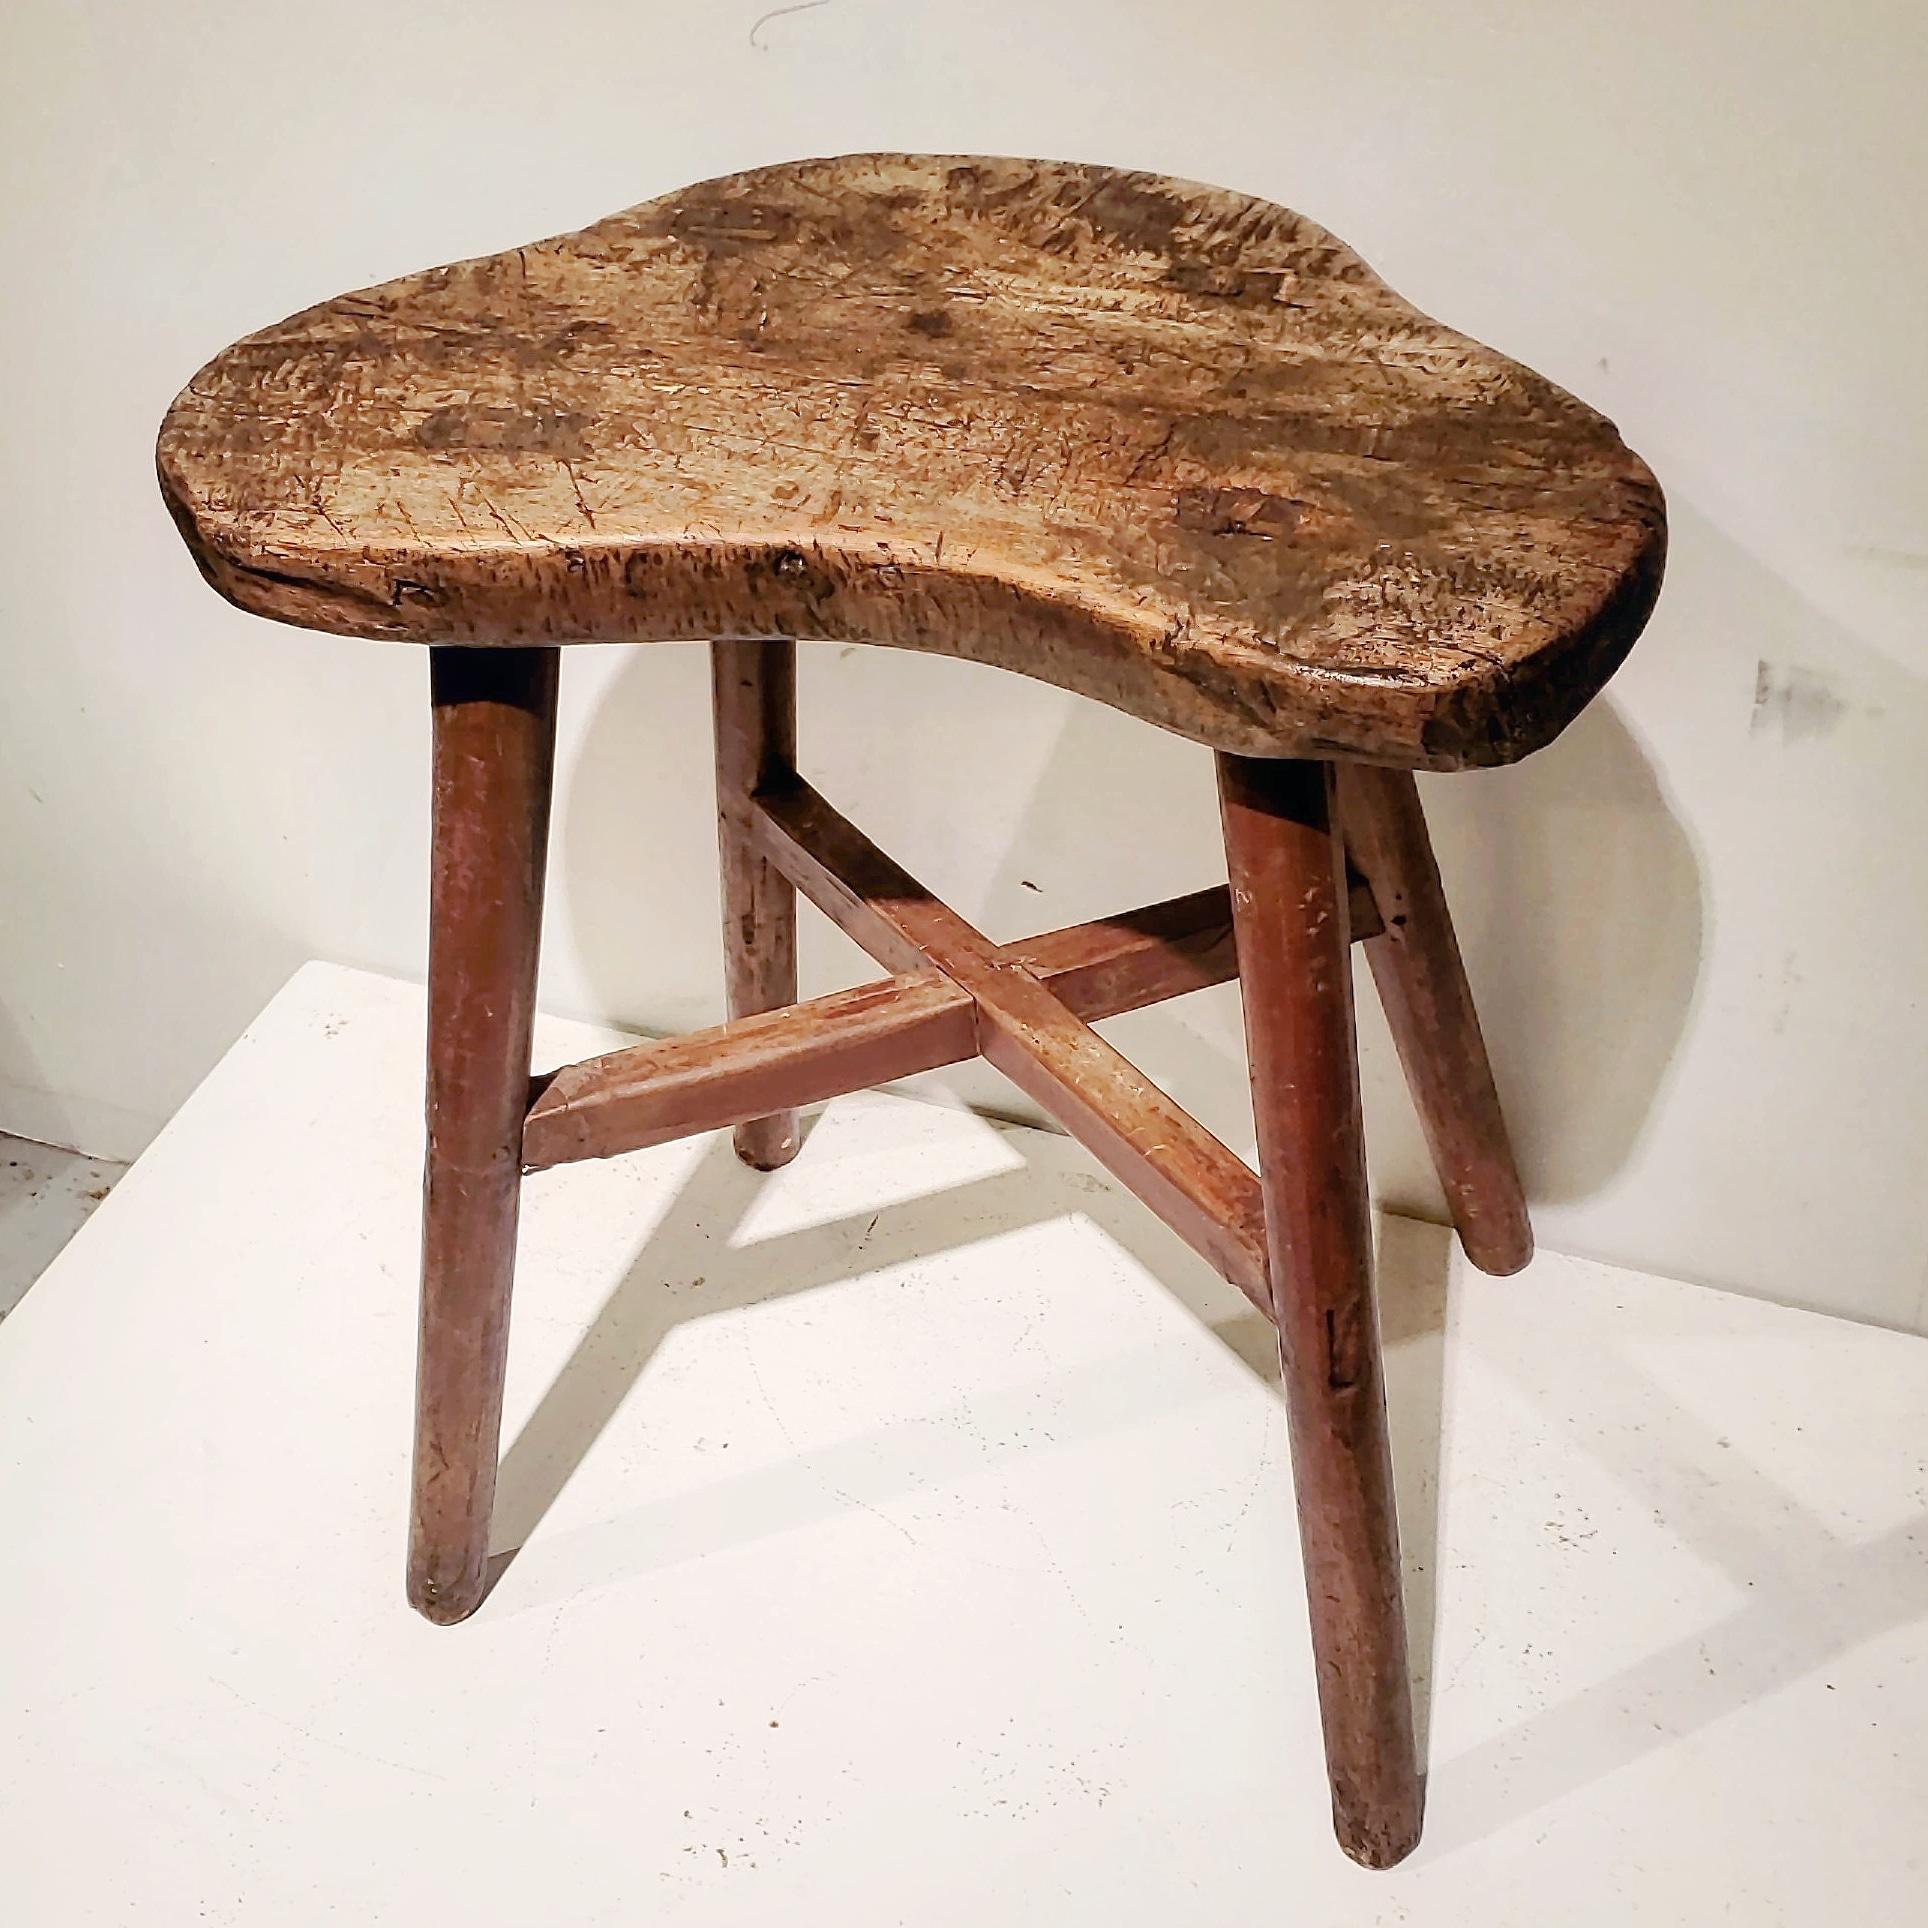 Primitive Early 19th Century American Stool in Old Red Wash For Sale